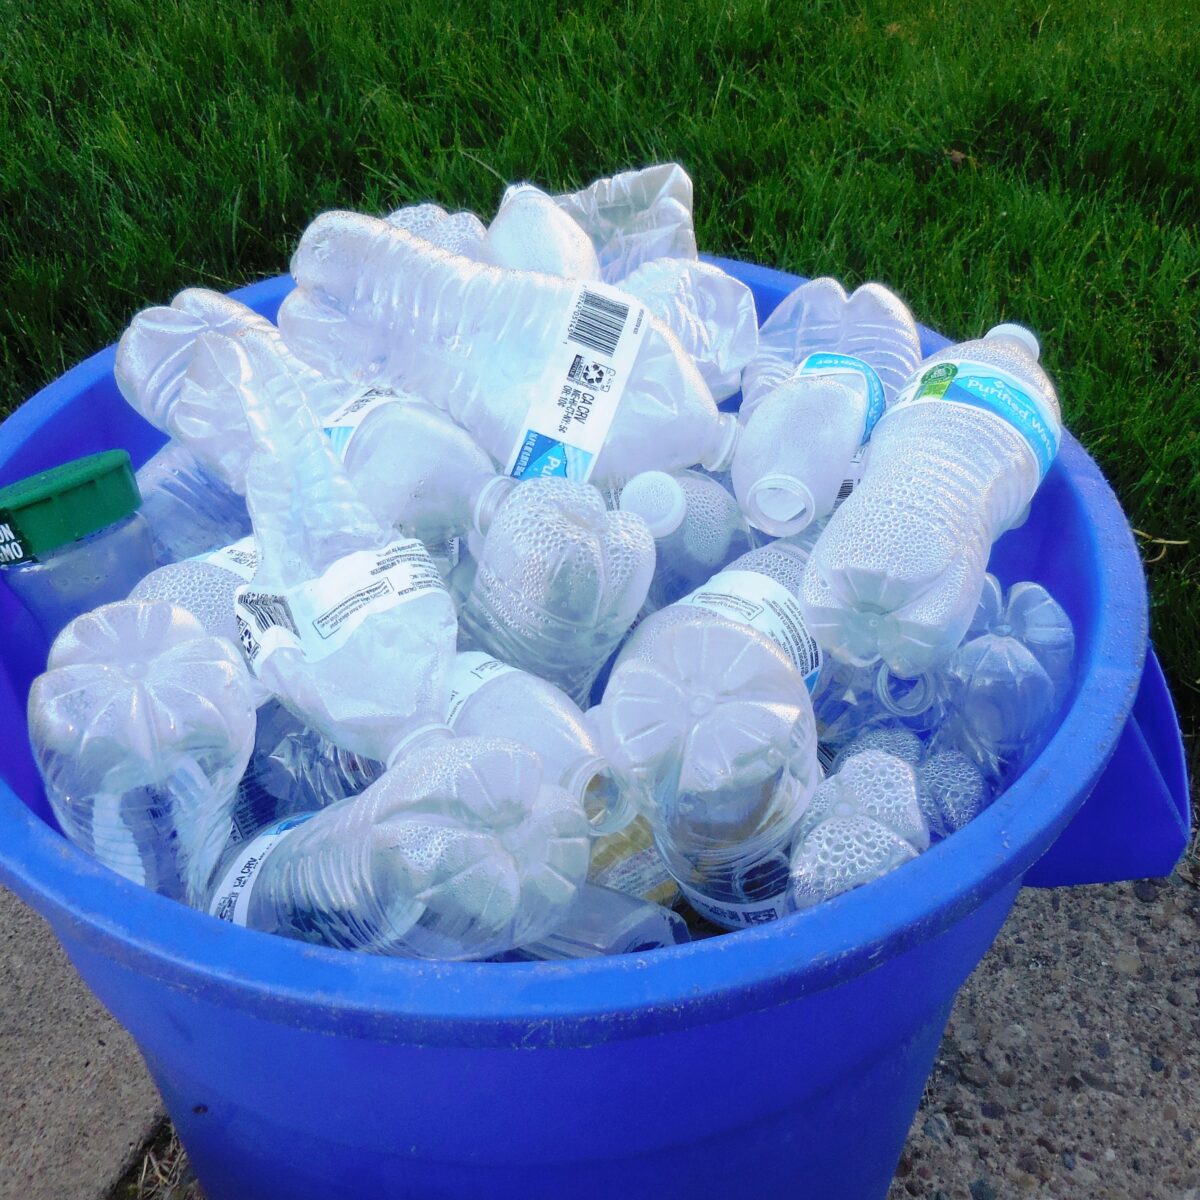 Reduce waste and avoid plastic on this Earth Day with the Pennsylvania Resources Council